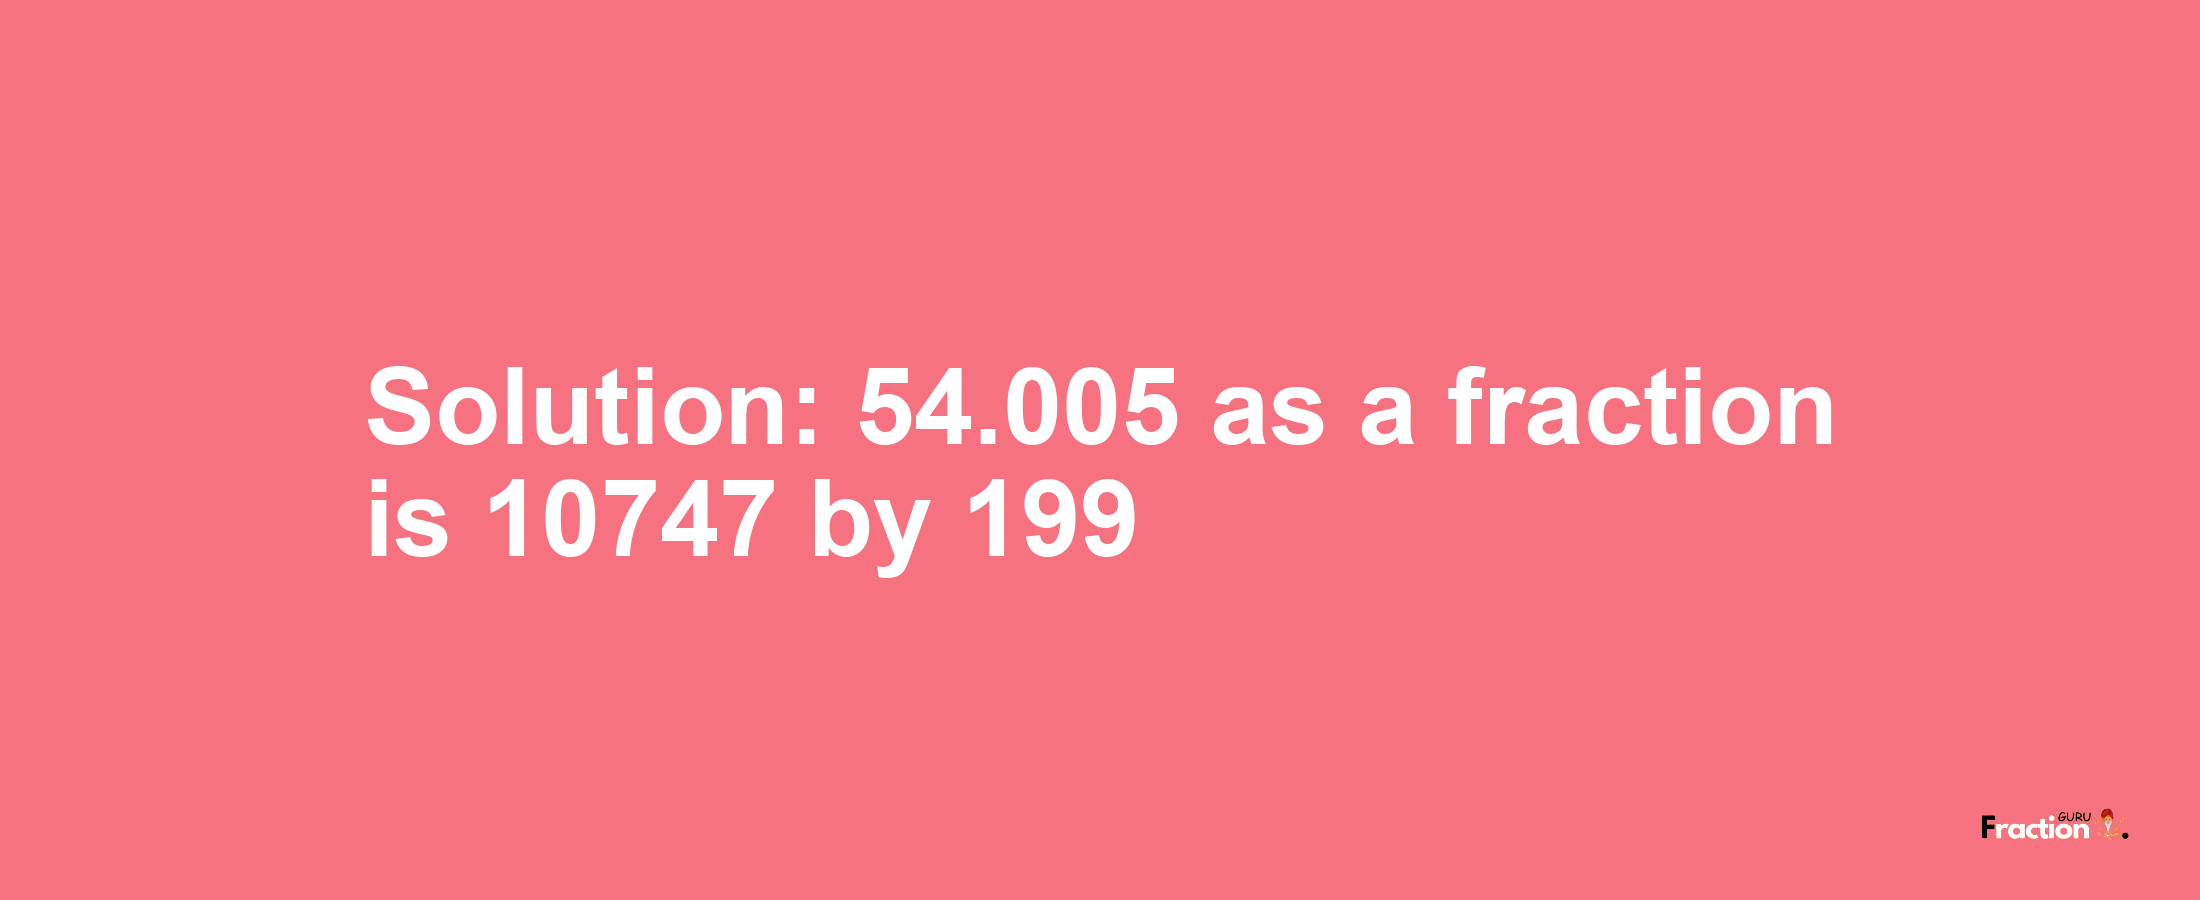 Solution:54.005 as a fraction is 10747/199